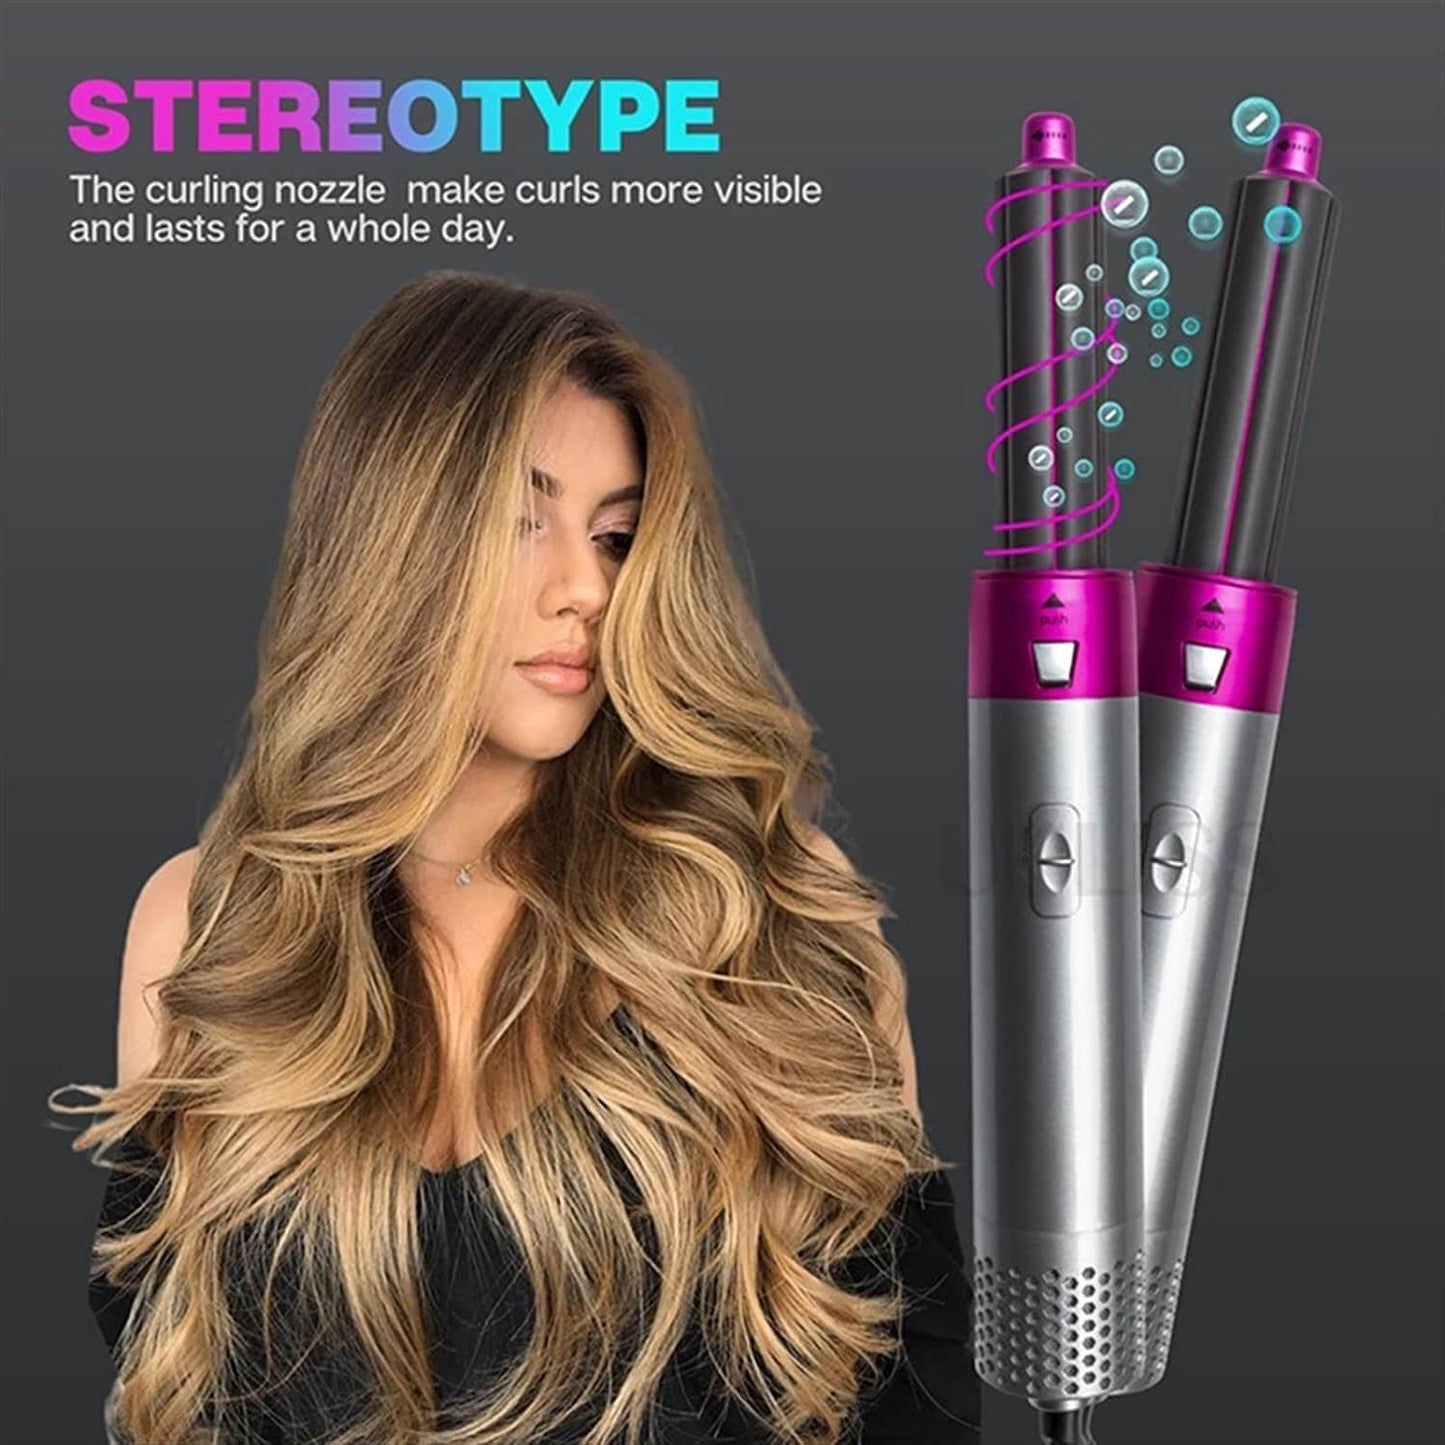 One Step - 5 In 1 Multifunctional Hair Dryer Styling Tool